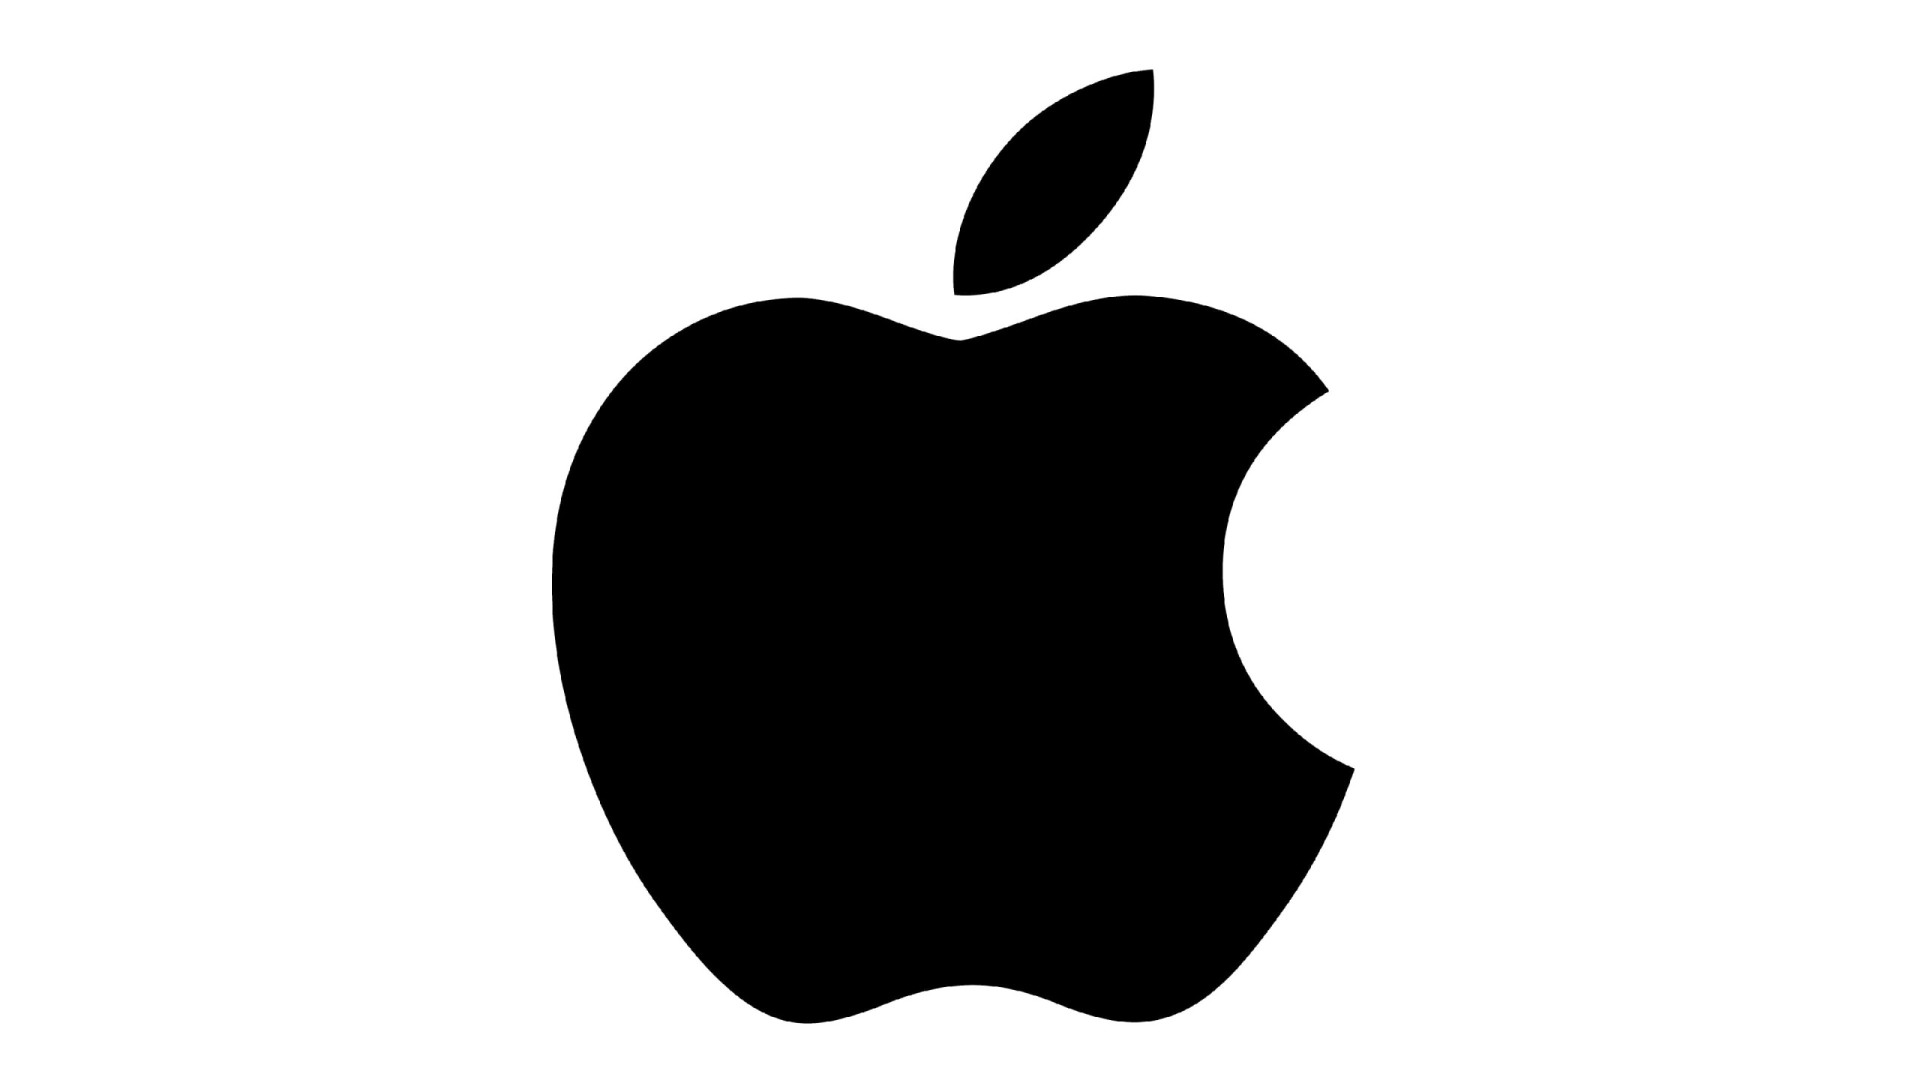 Apple logo for the blog article "What Are the Types of Logo Design?"